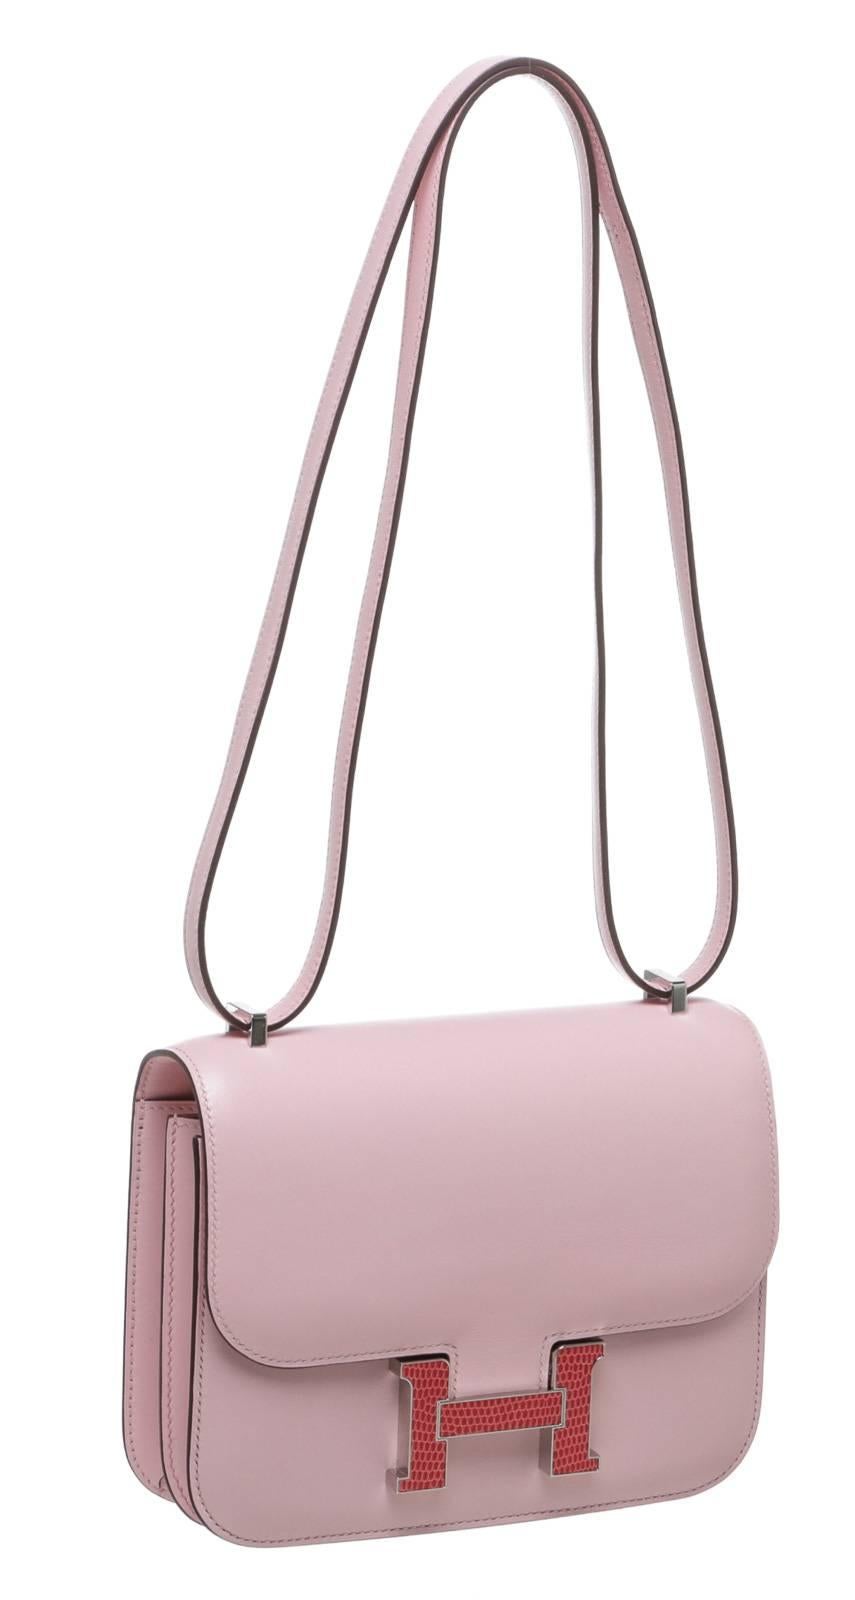 Show off your signature style with this gorgeous Hermes handbag! This Constance bag is constructed from pink leather with an exotic lizard H buckle along the front. Open the flap to reveal a spacious interior for your valuables! 